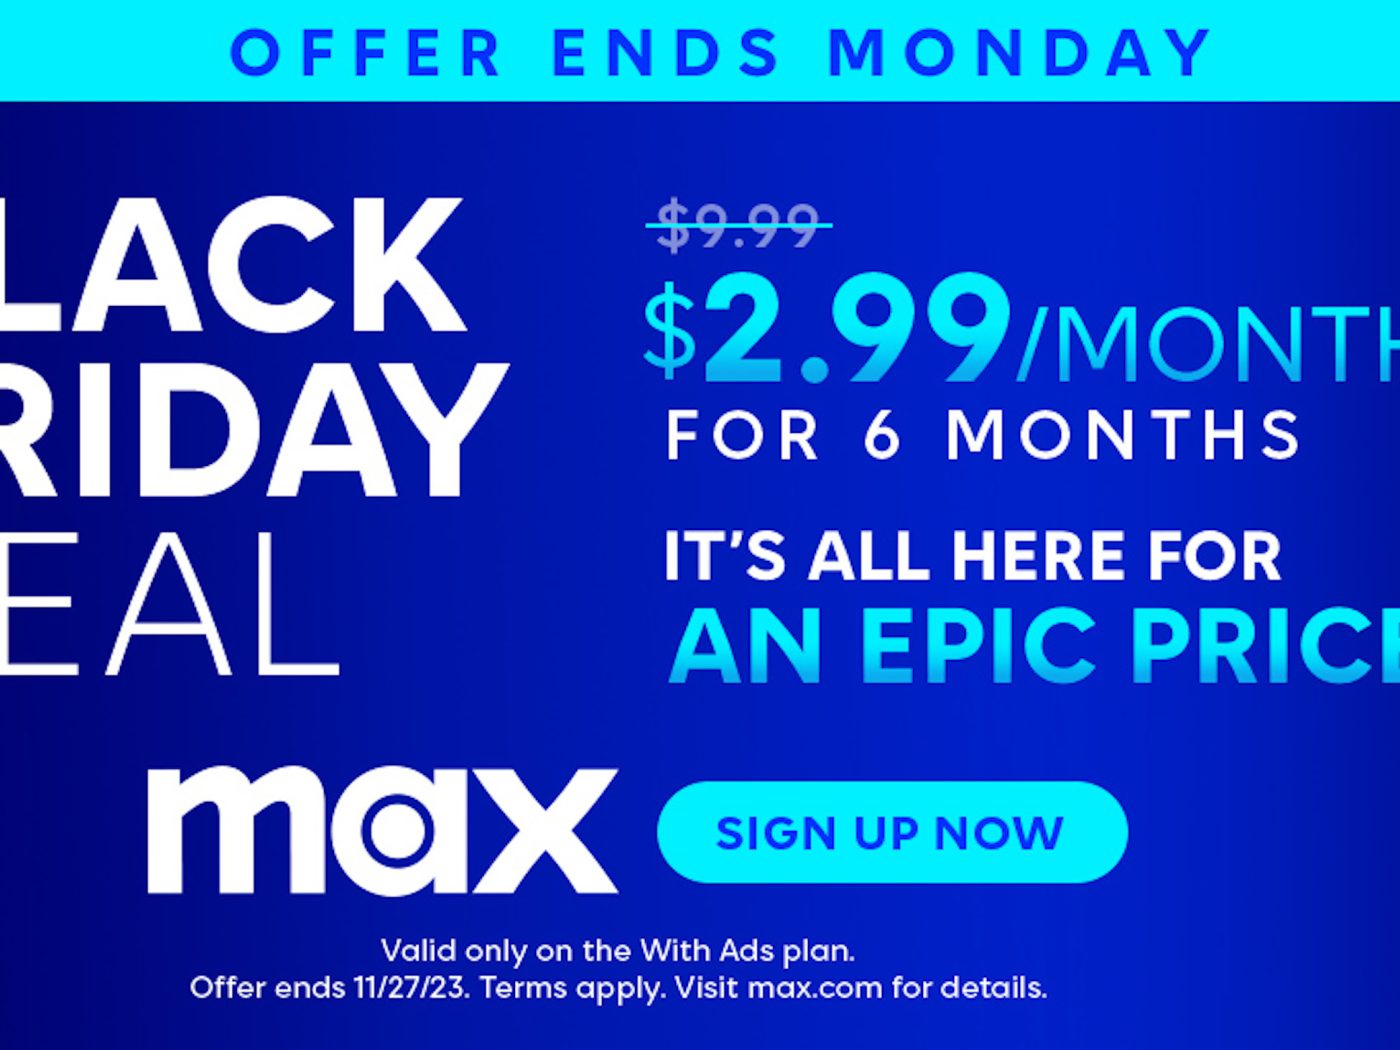 Sign up for HBO MAX in its epic Black Friday Deal